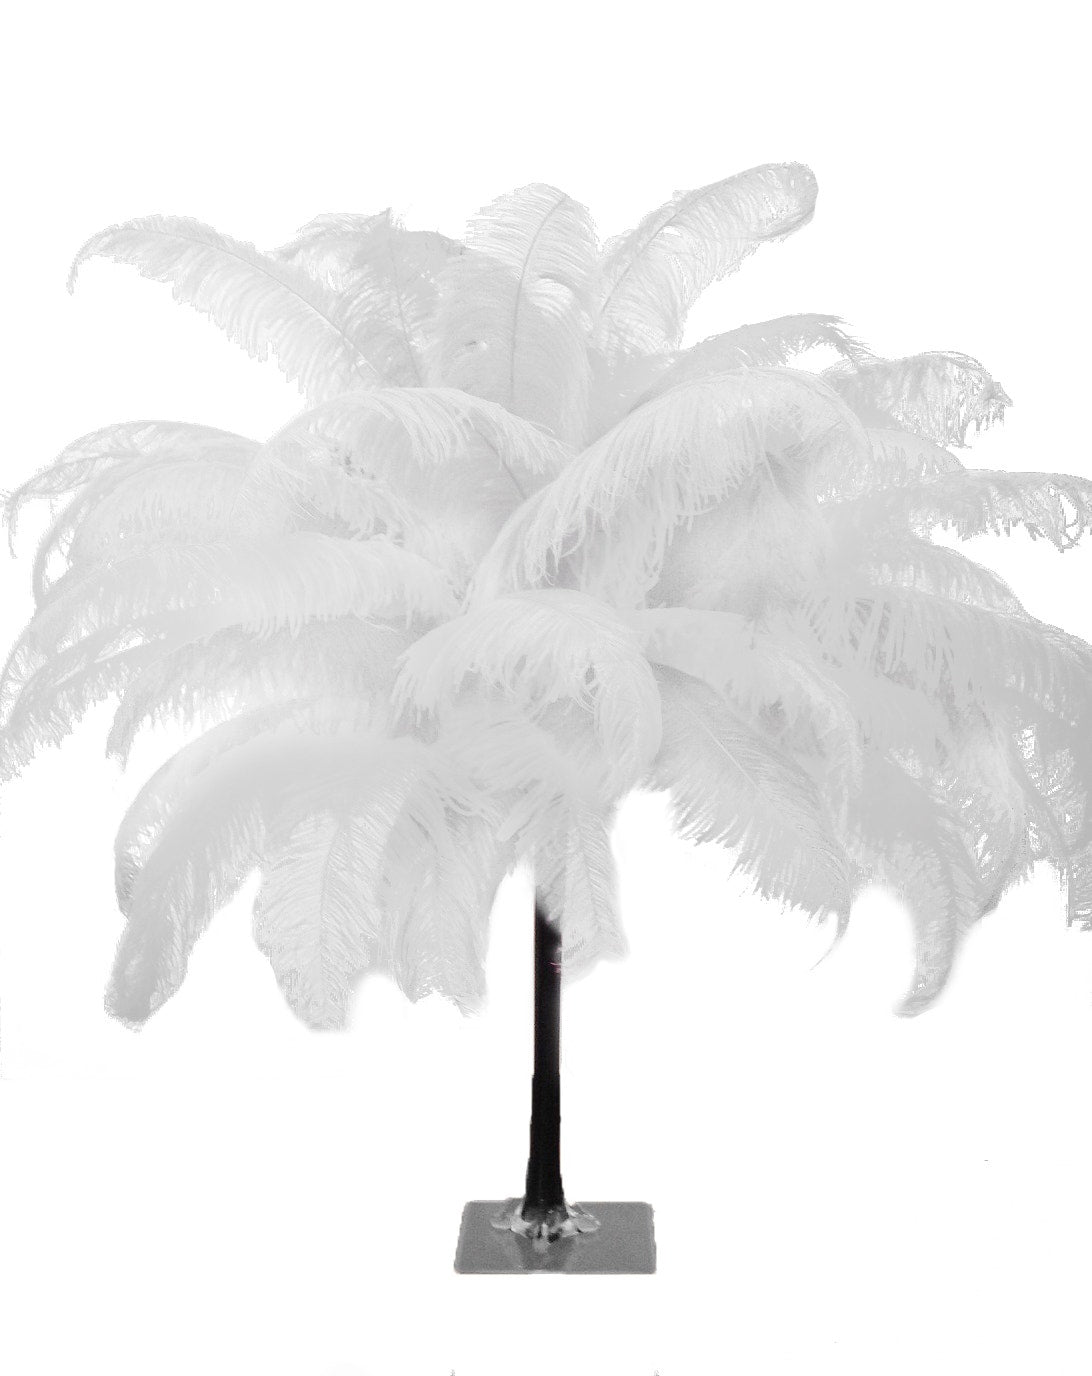 Large Ostrich Feathers - 18-24" Spads - White